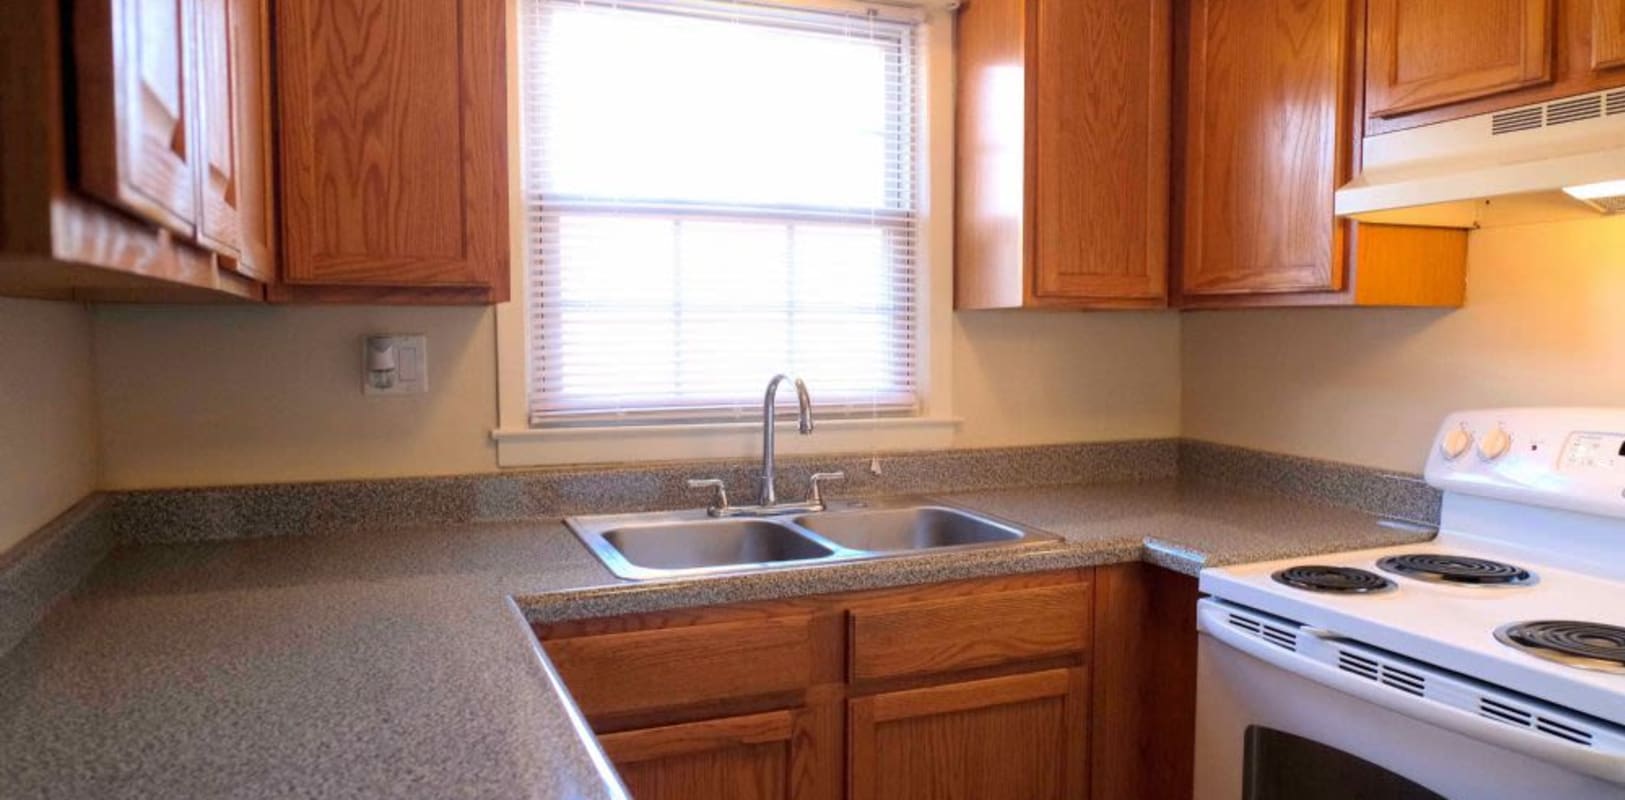 Kitchen with a large window at Hillside Terrace Apartments in Newton, New Jersey